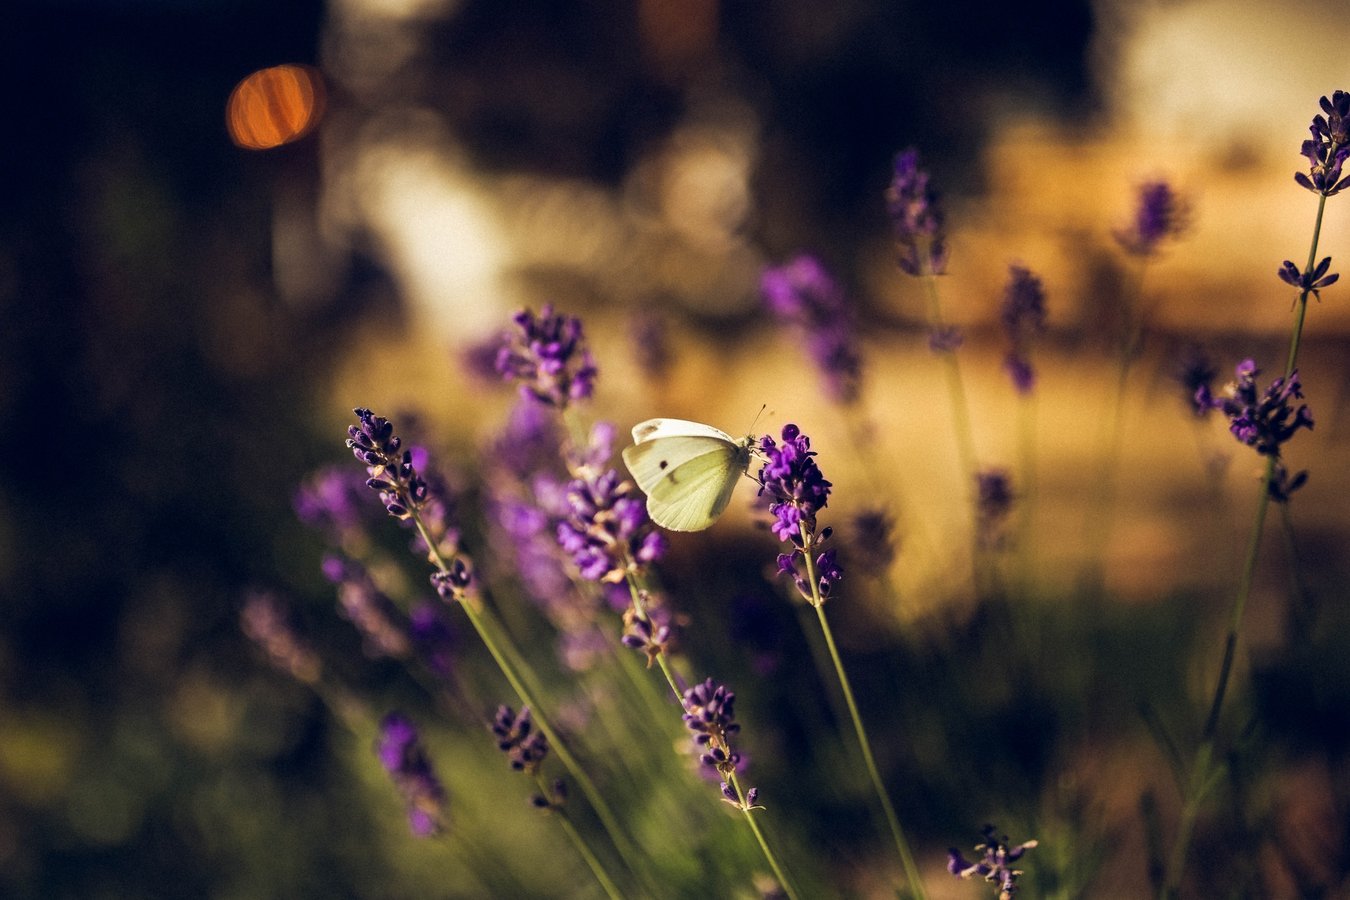 A small white moth perched on lavender flowers at sunset.